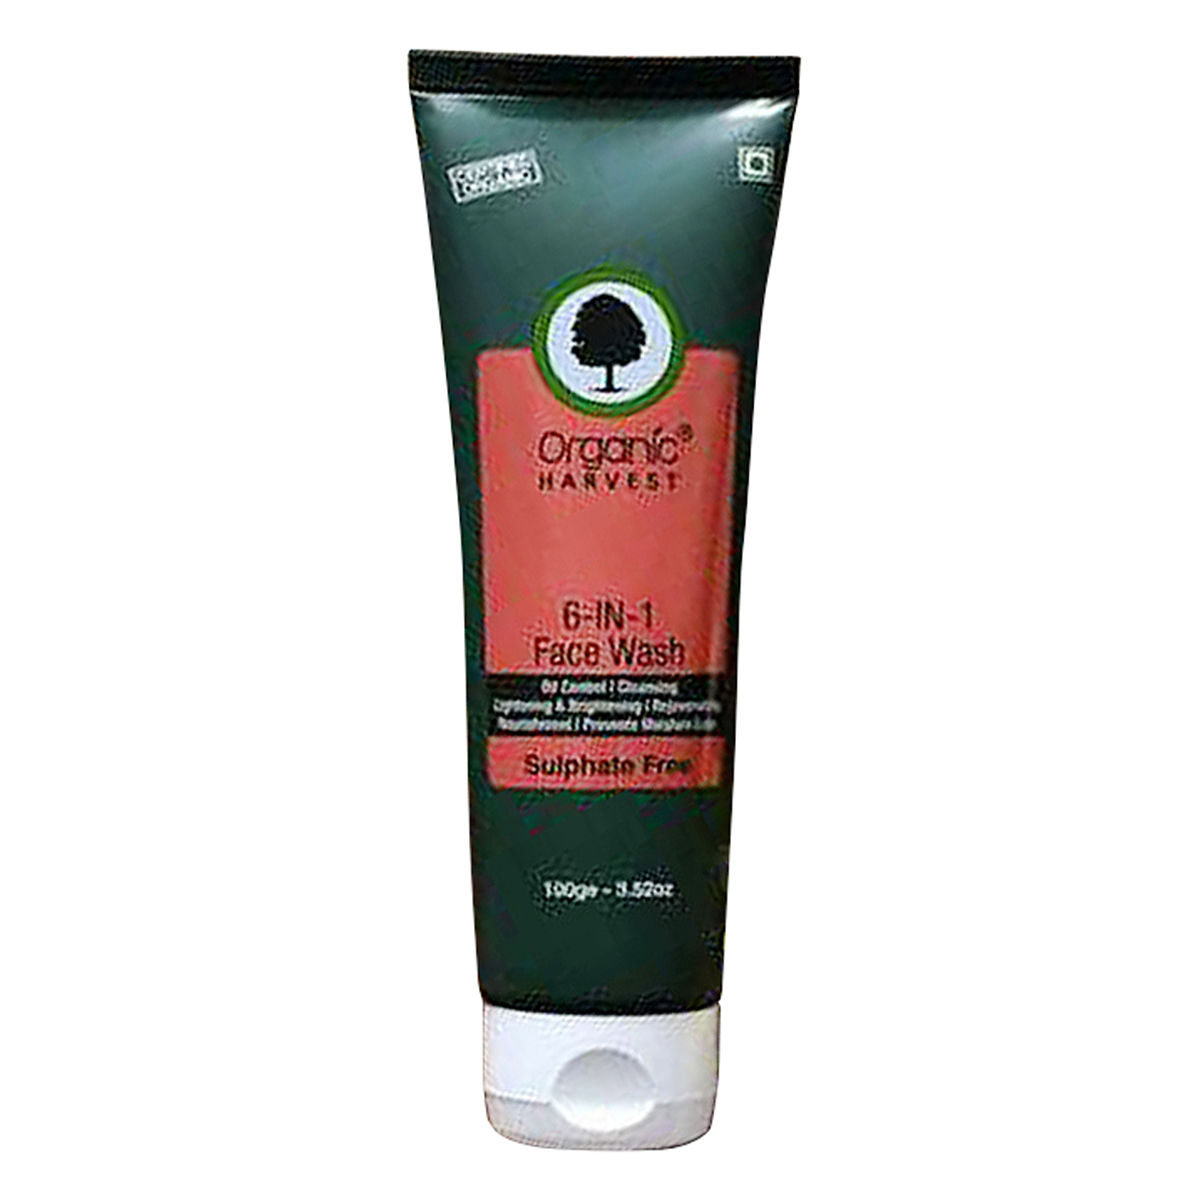 Buy Organic Harvest 6-In-1 Face Wash, 100 gm Online